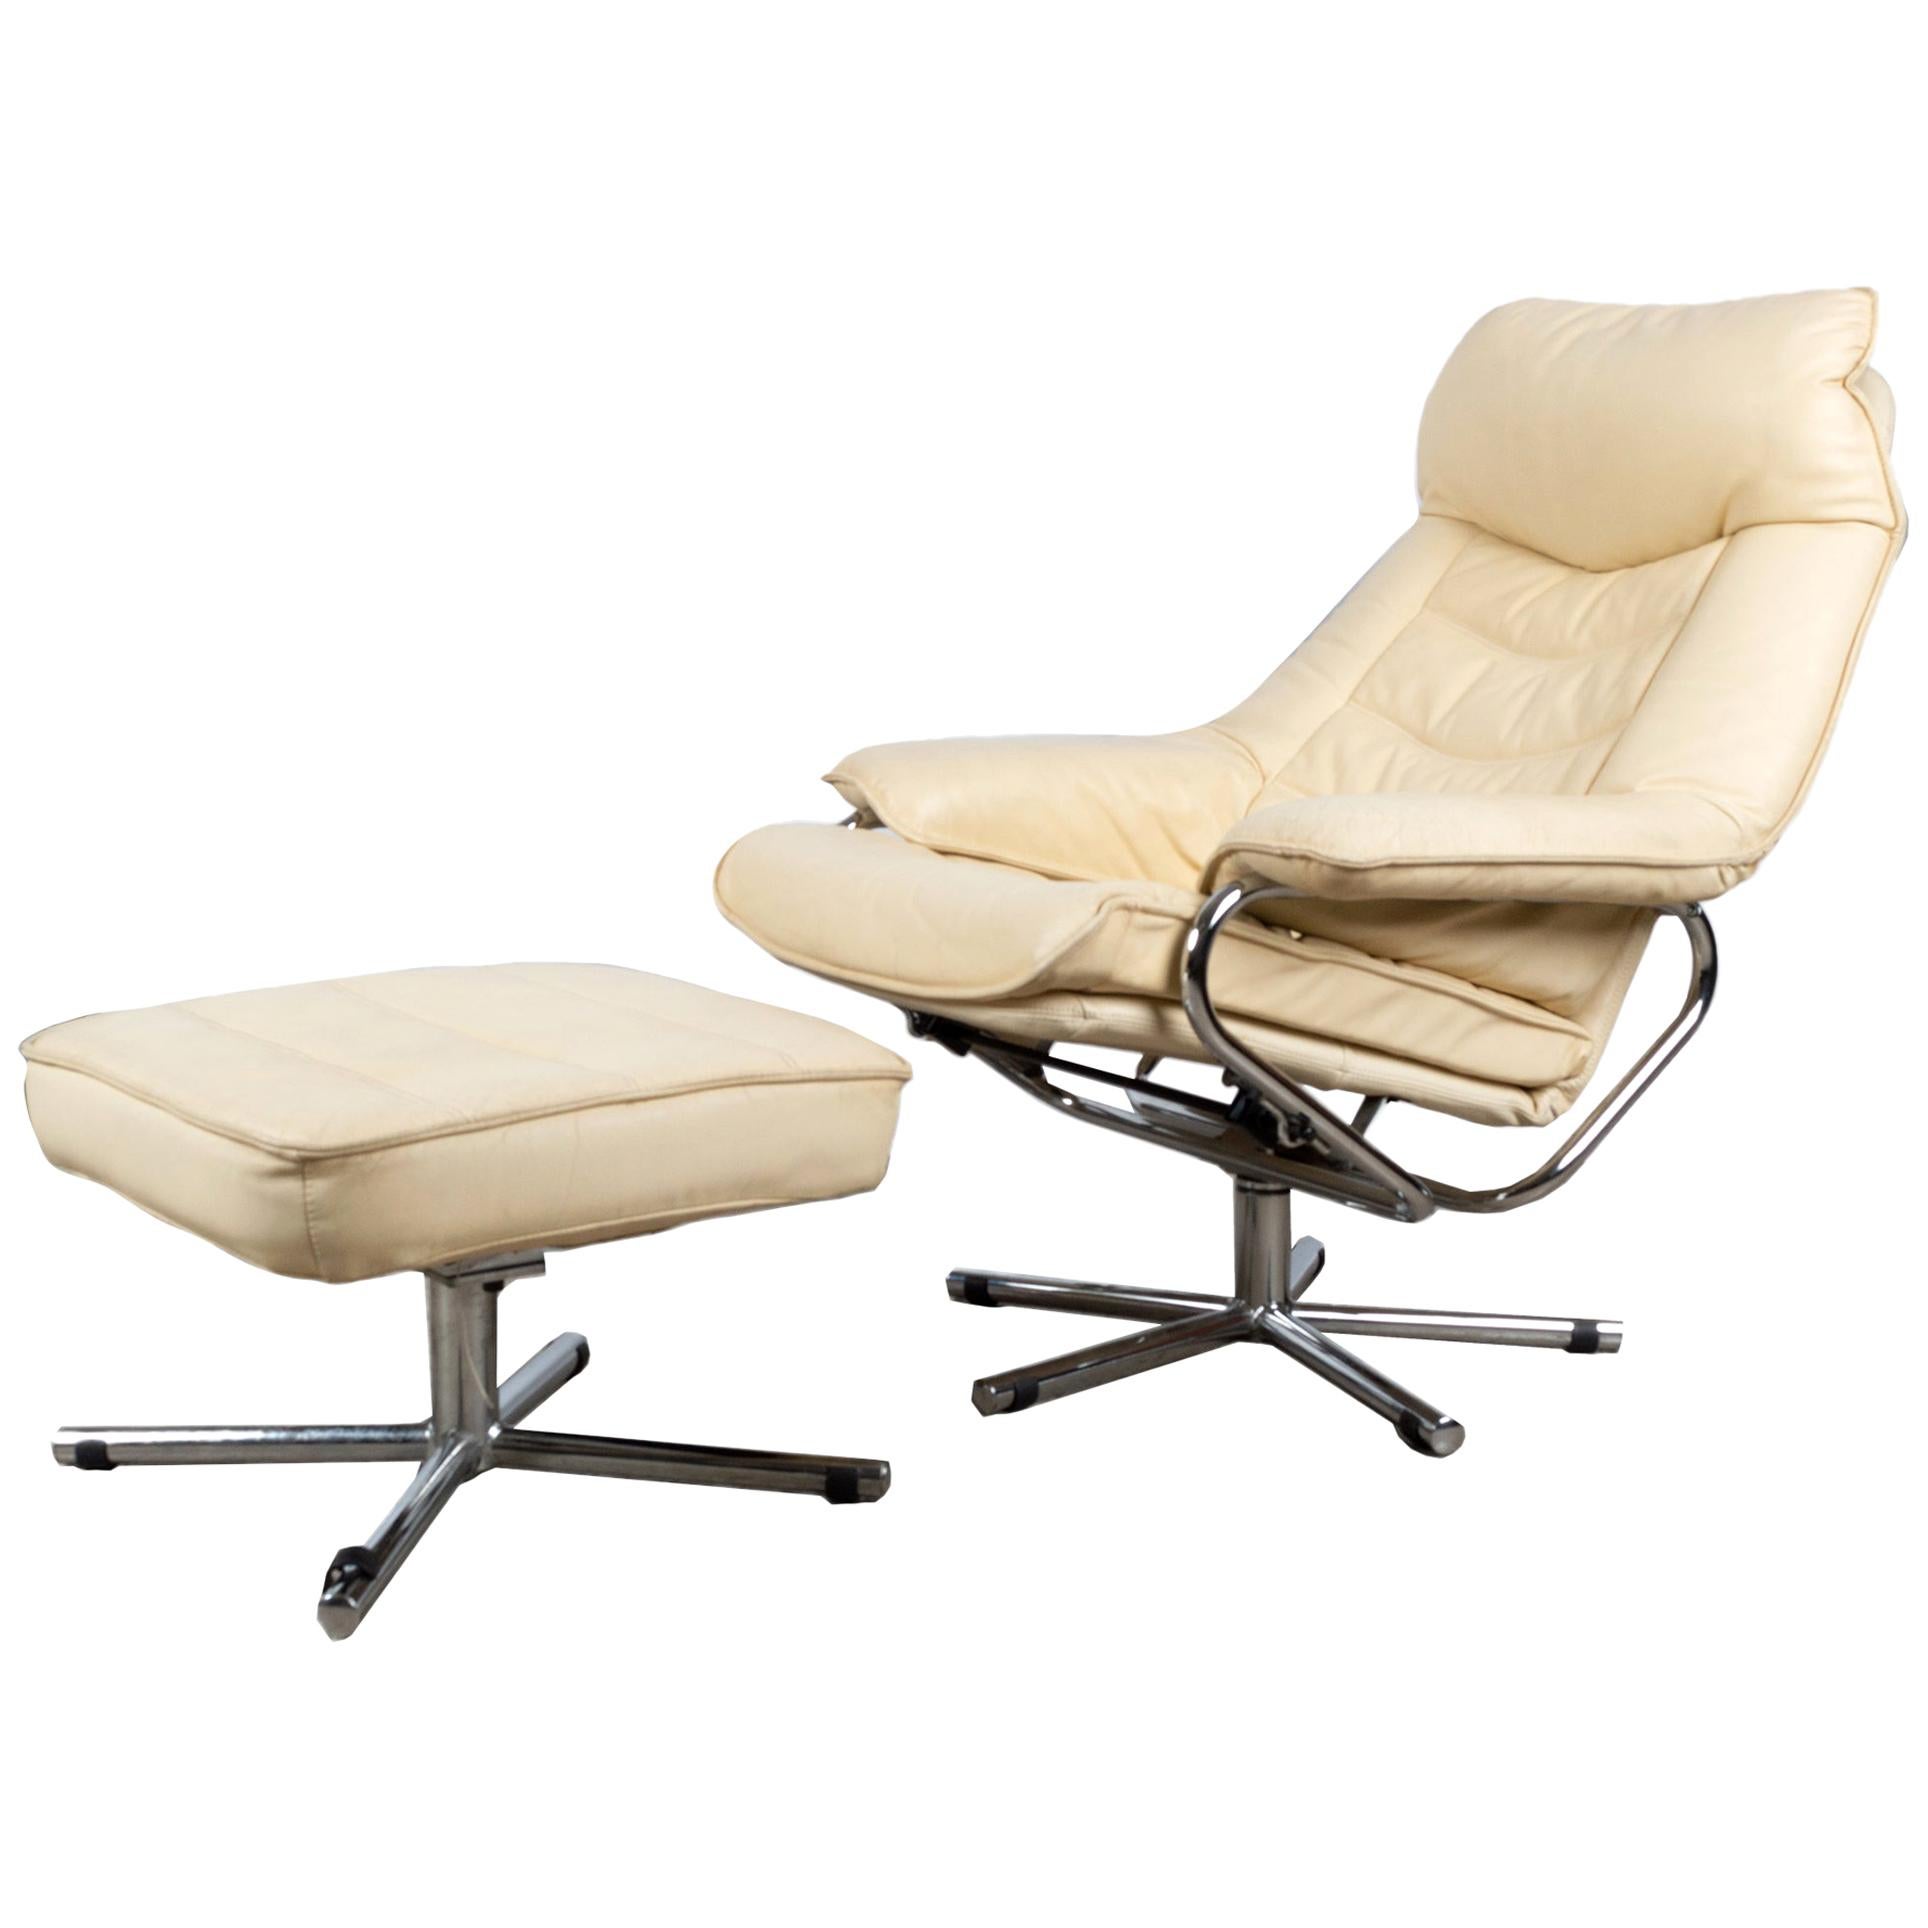 Leather Reclining Swivel Lounge Chair with Ottoman by Tetrad, England circa 1970 For Sale